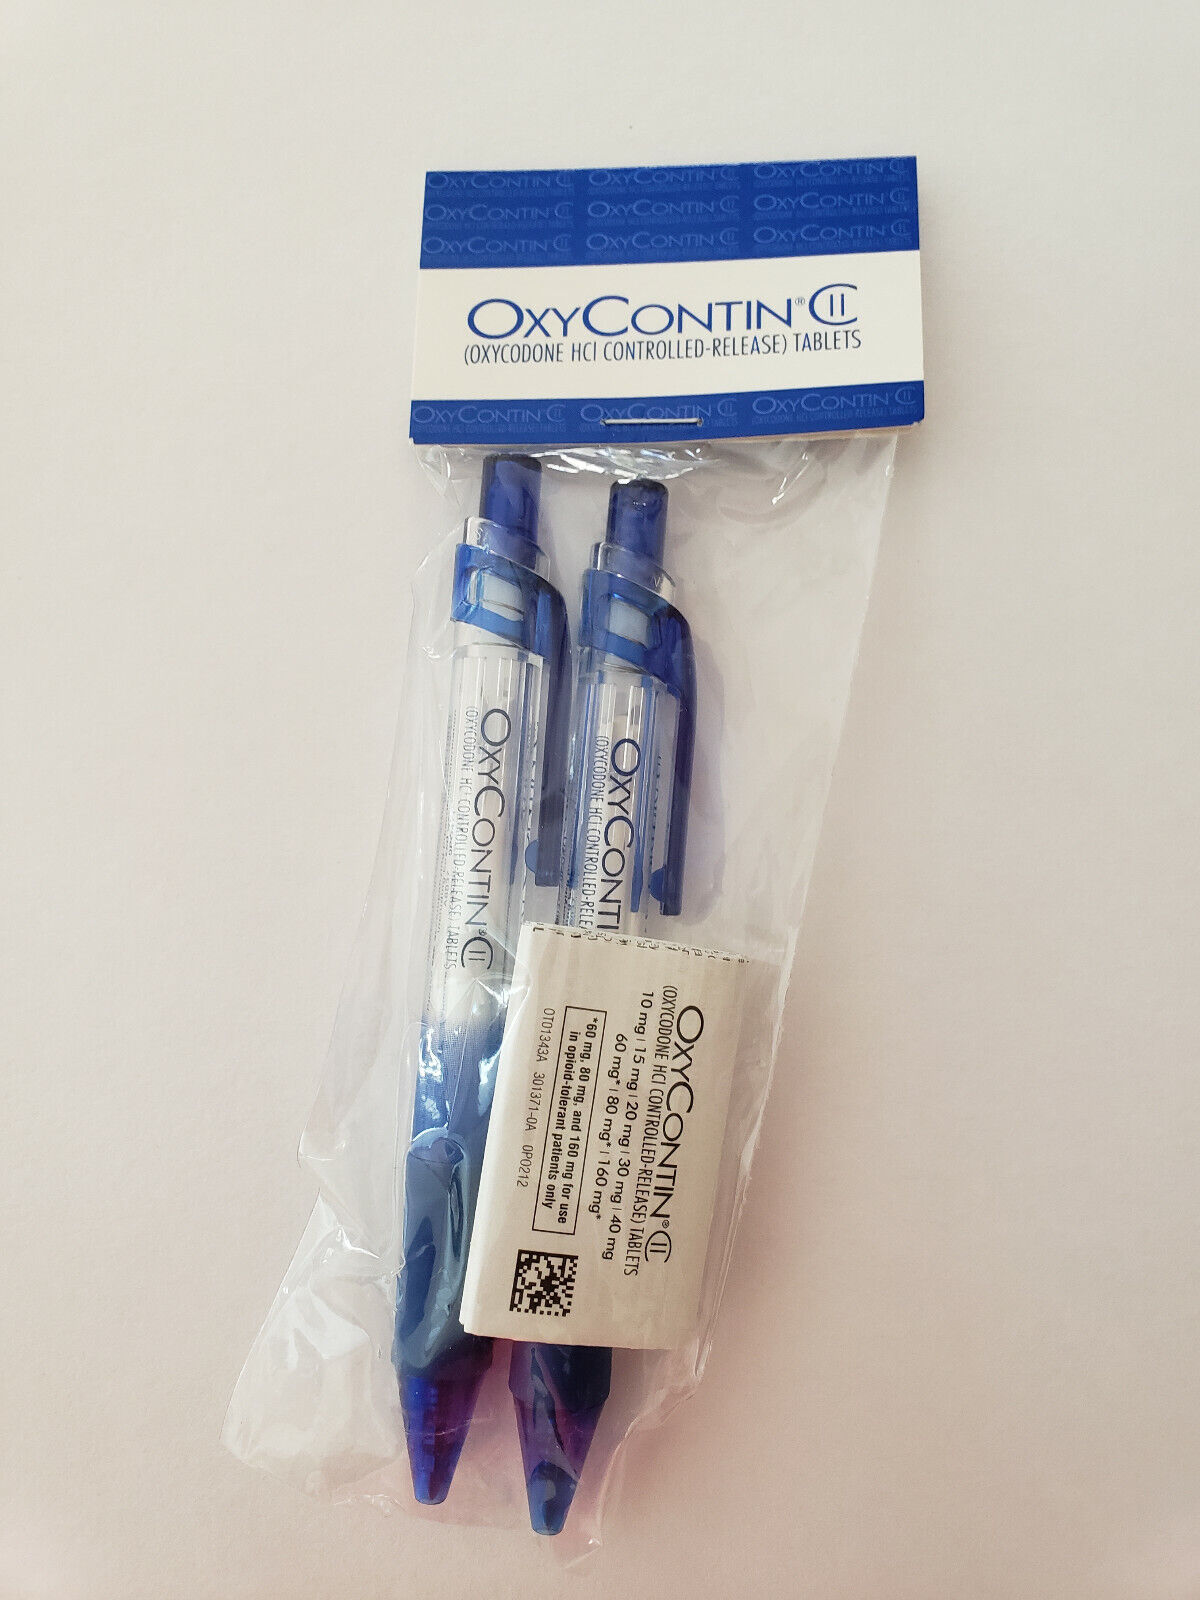 2 OxyContin Drug Rep Pens Purdue Pharma Oxycodone NEW Sealed in Orignal Package